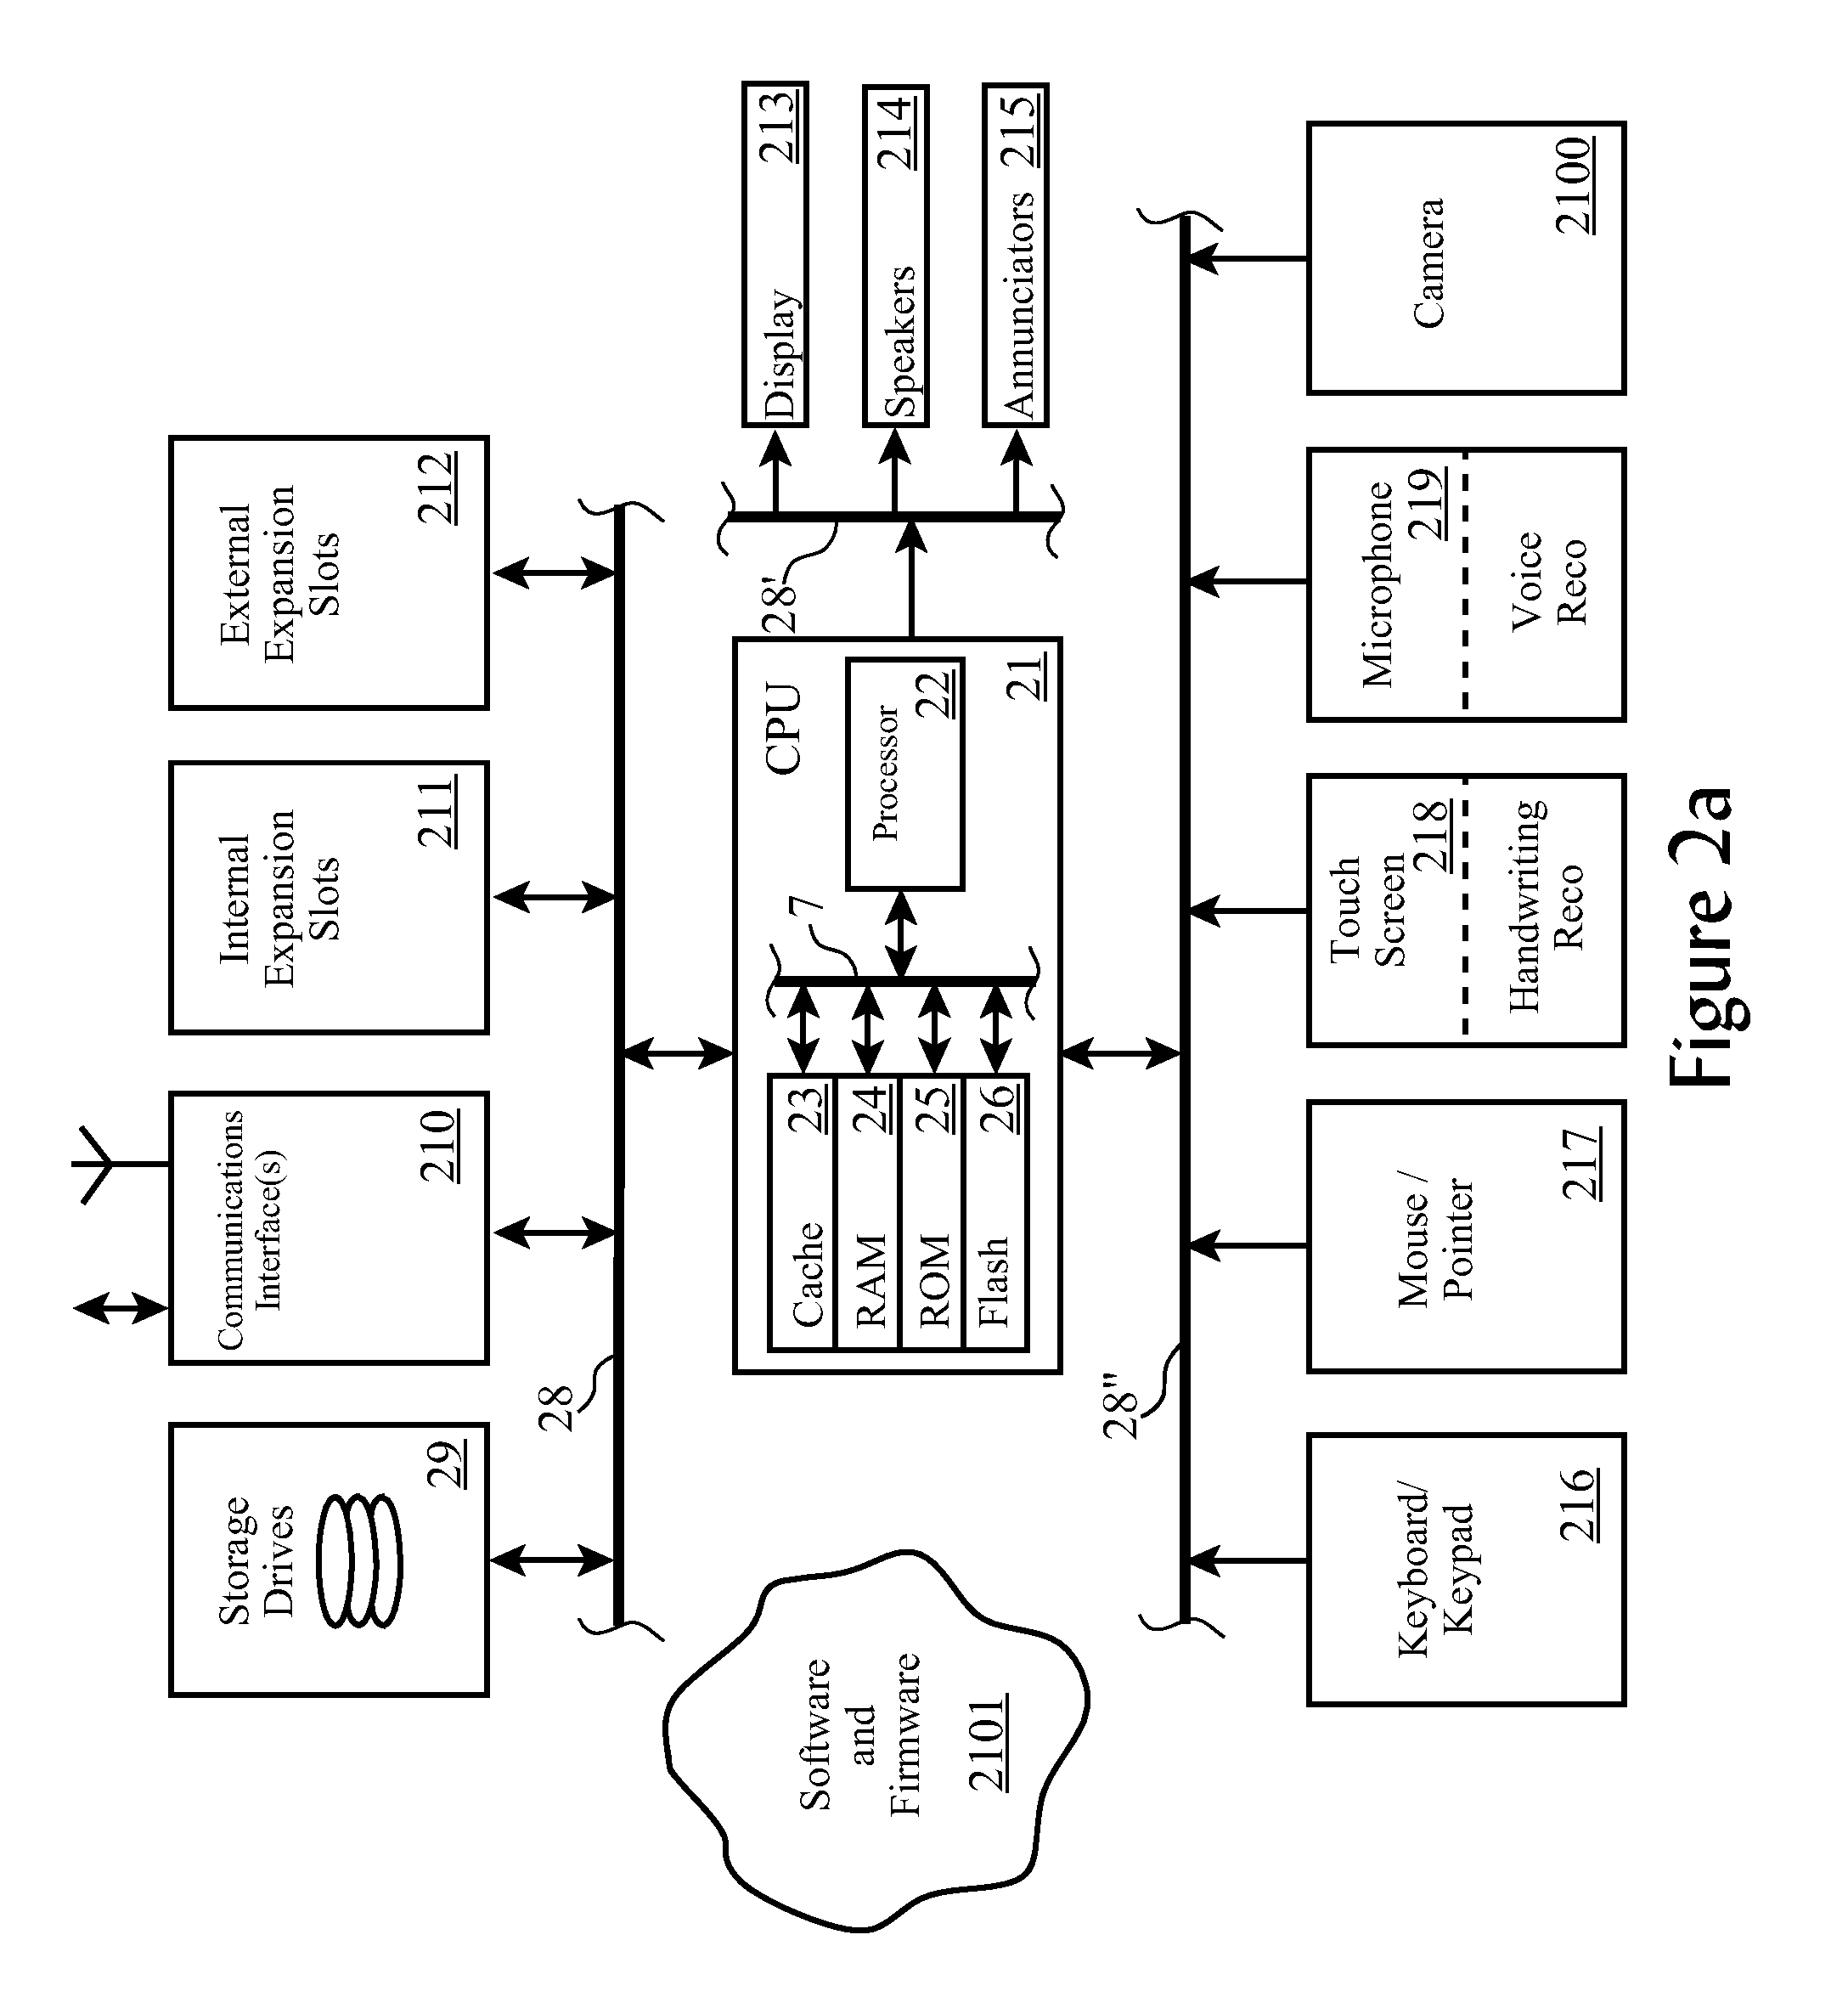 User interface for color transfer control in textile processing equipment